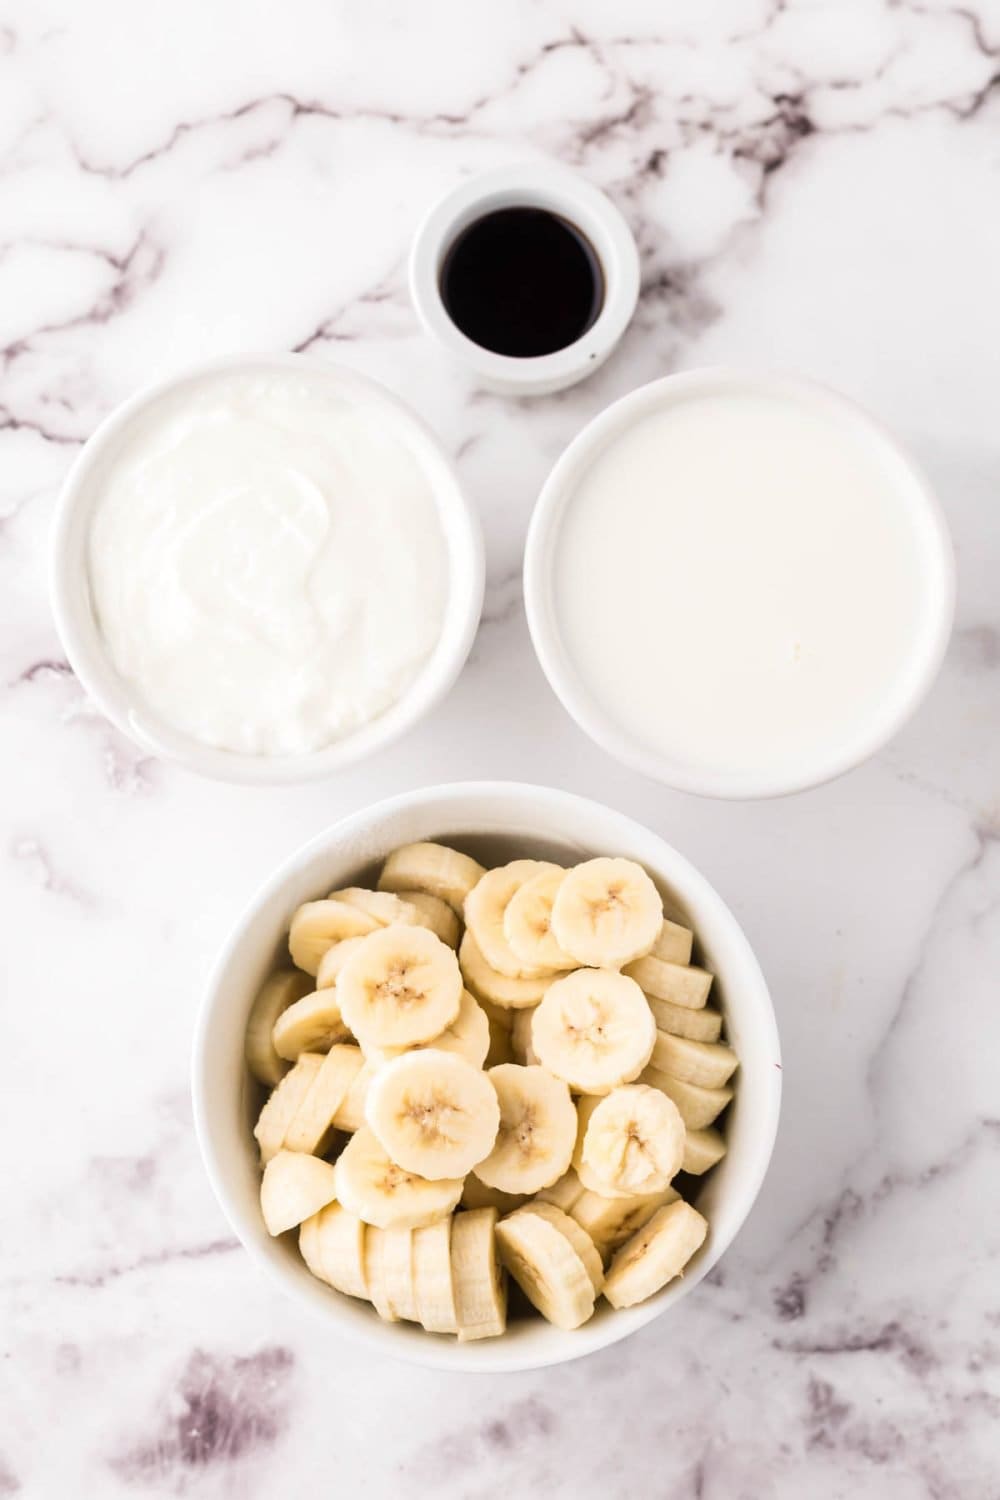 ingredients for banana smoothie.